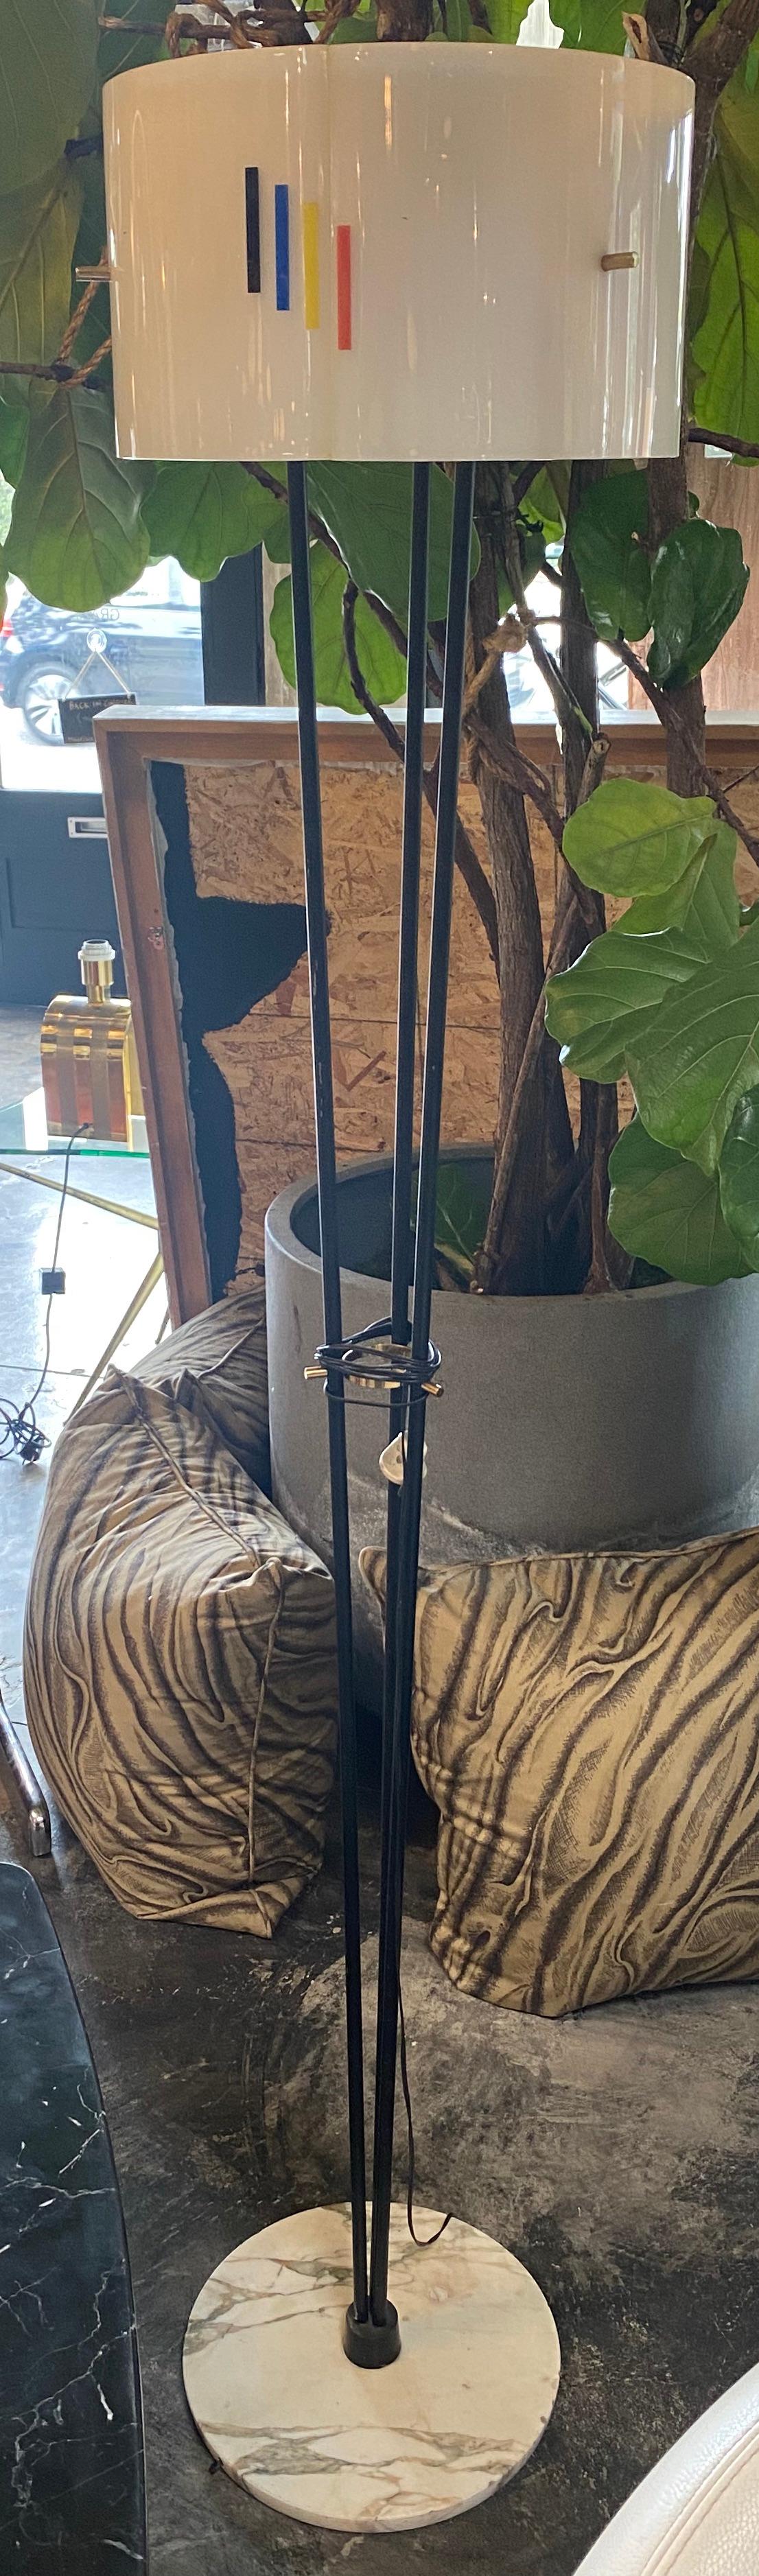 Beautiful floor lamp with carrara marble base made by Esperia, the lamp is in good conditions, nothing touches, nothing clashes, which gives this piece of furniture a completely peaceful yet strong expression. A piece like this will stand the test